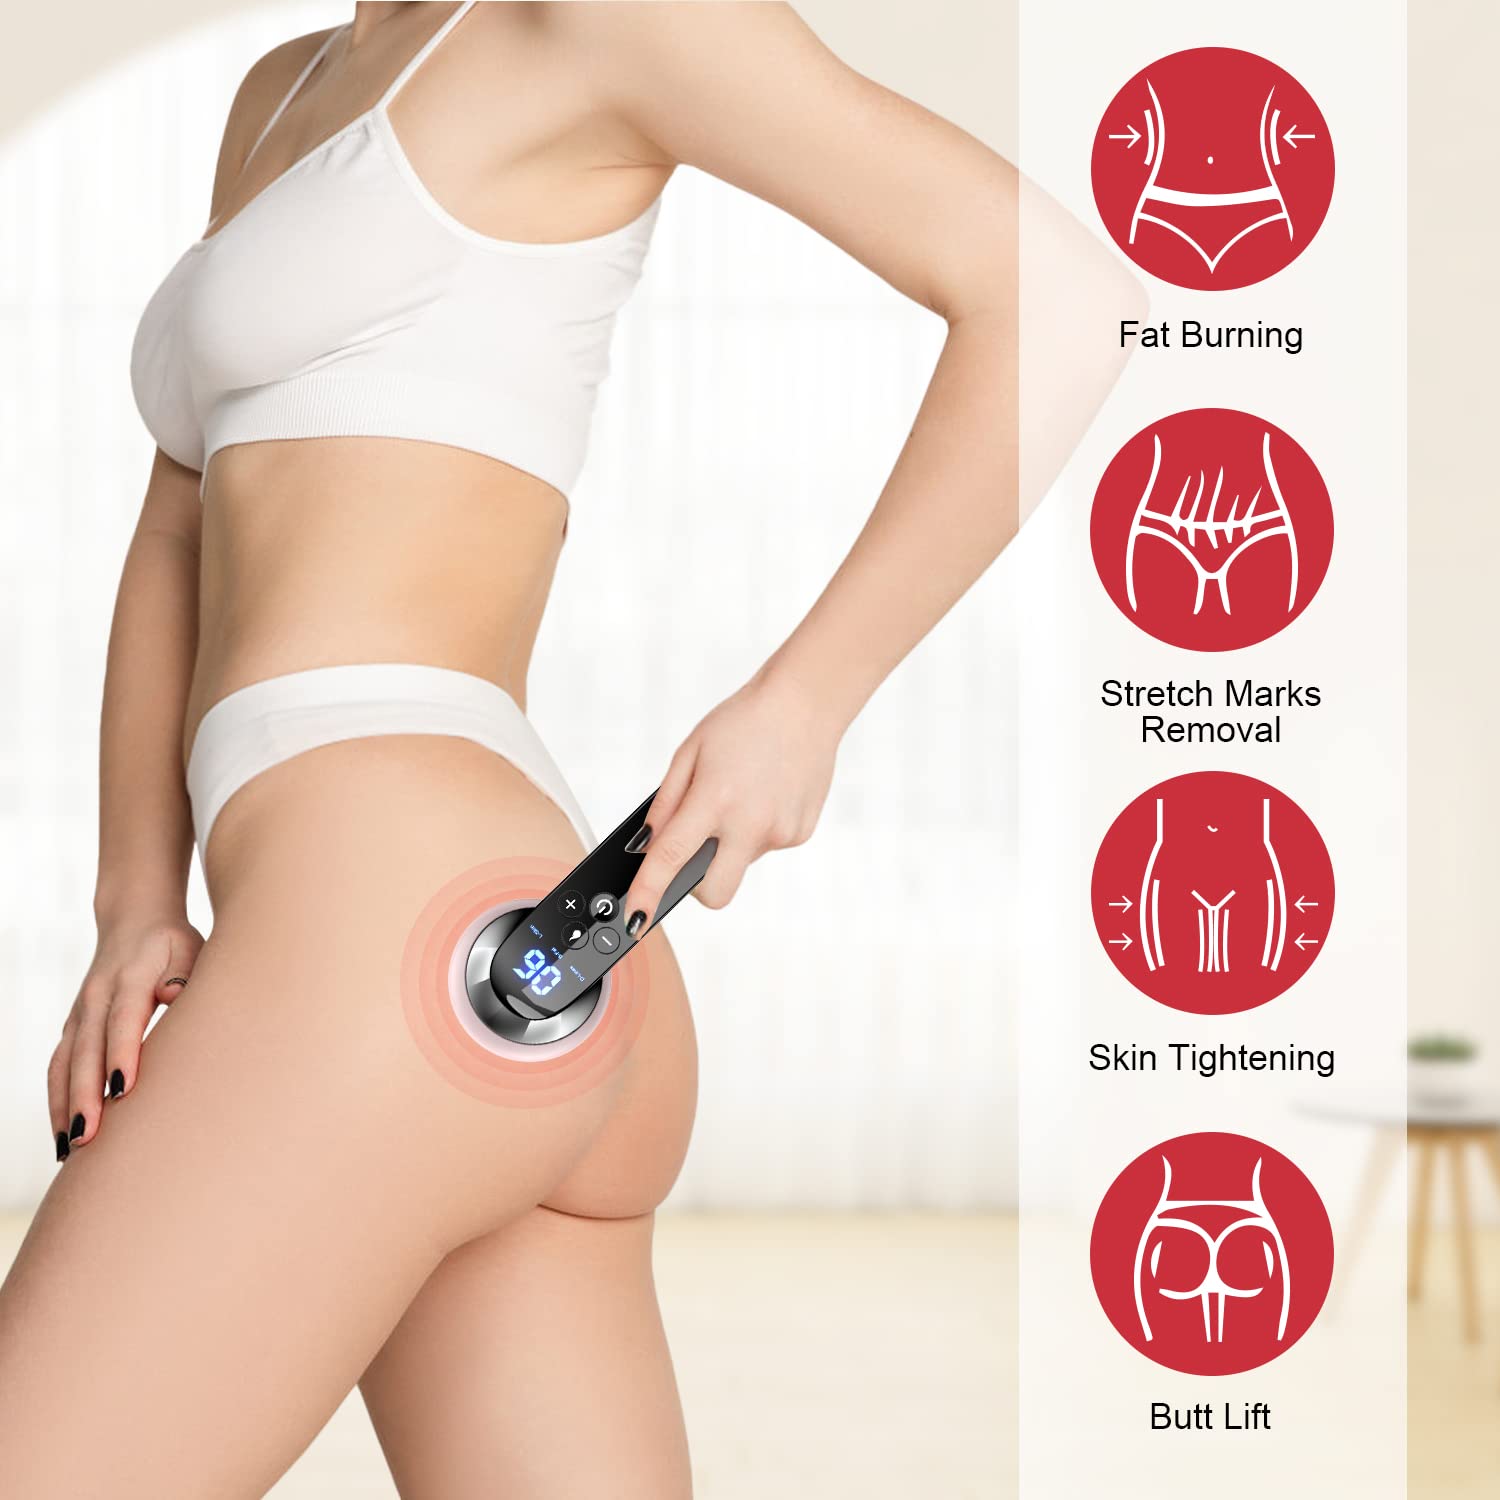 Byindorn Body Sculpting Machine - Electric Cellulite Massager - Handheld Wireless Body Shaping Device for Belly, Thigh, Arms, Hip, Leg - 3 Modes and 10 Adjustable Intensity